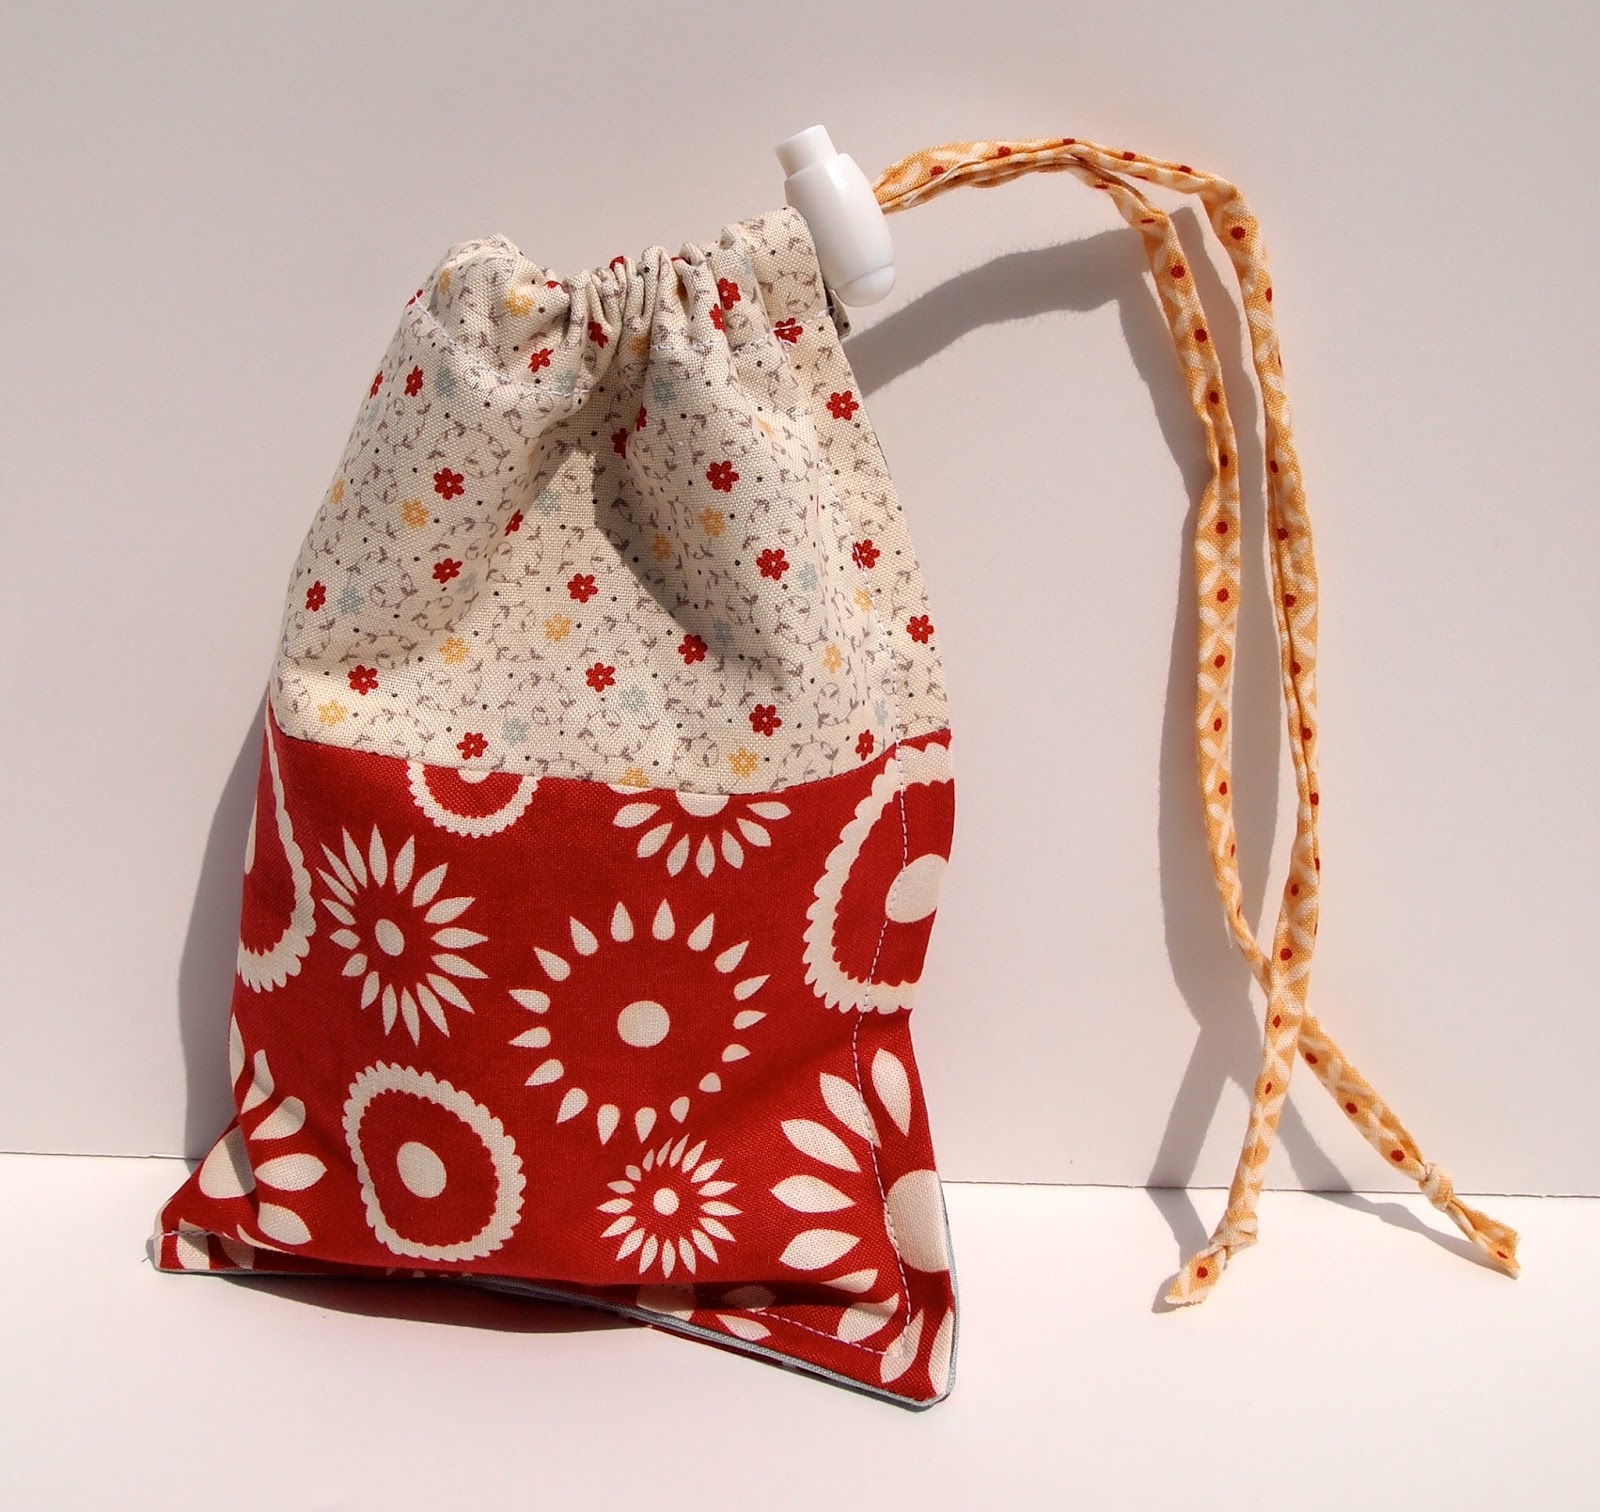 Craft Room Confidential: Pacifier Leash and Carry Bag